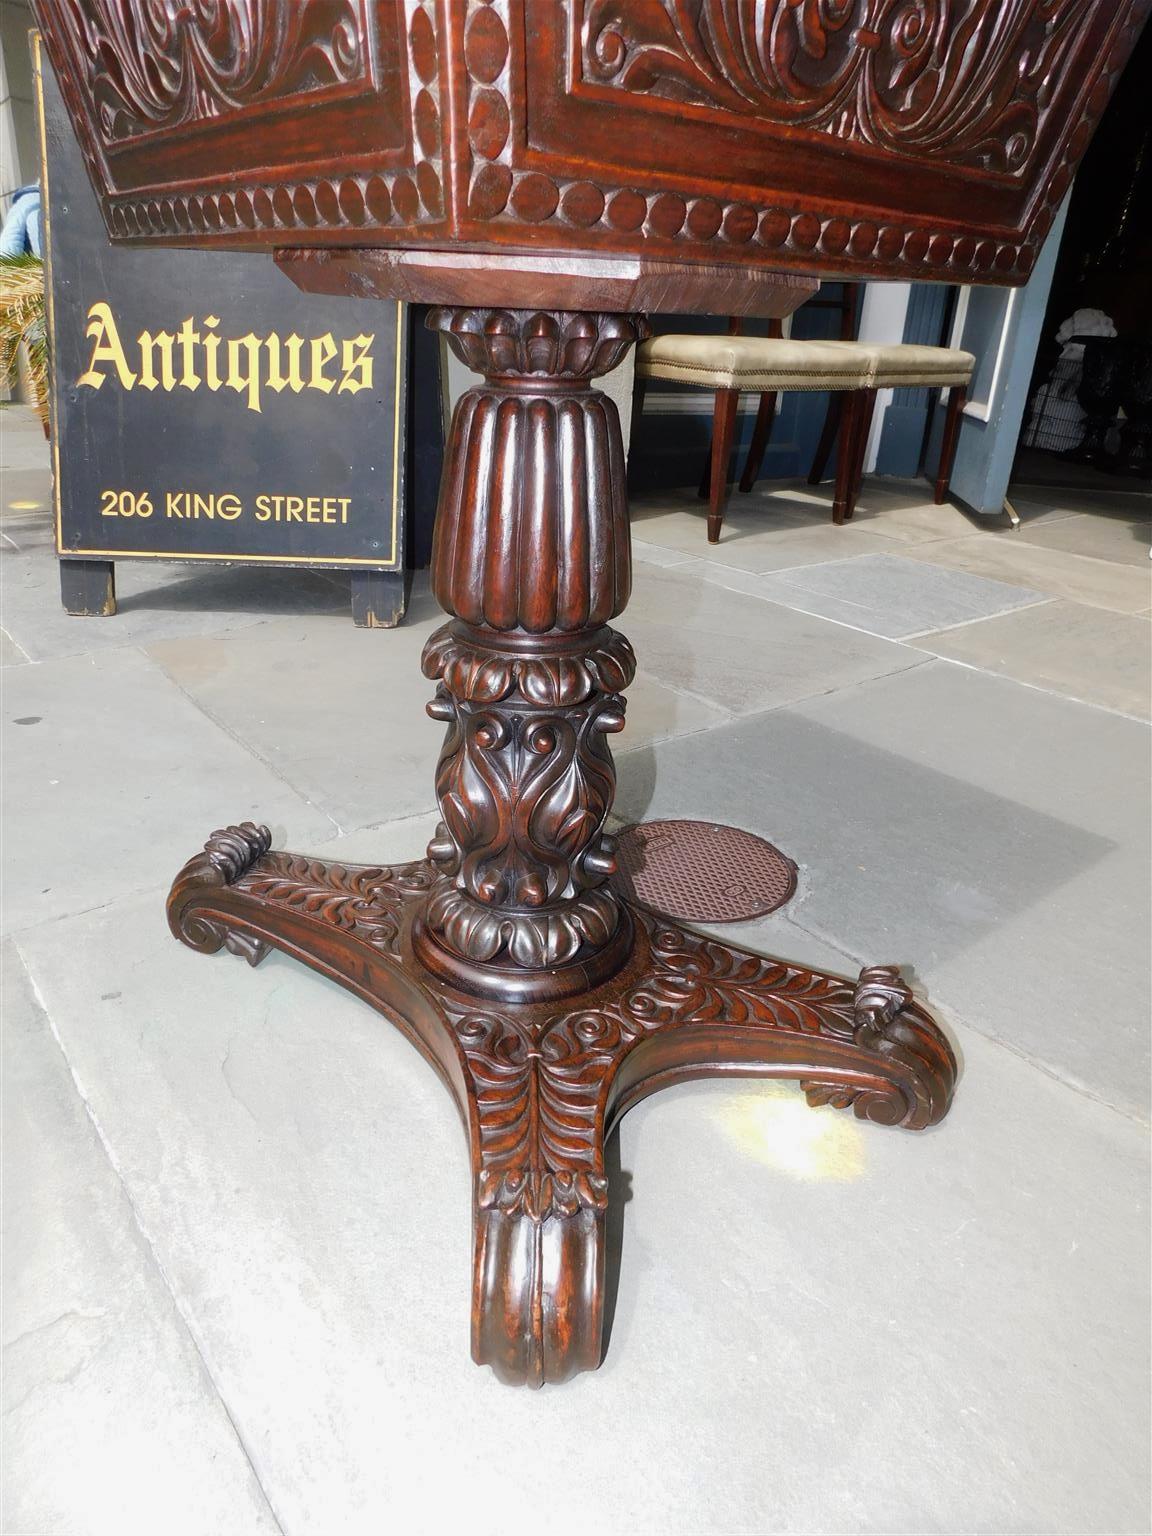 Brass Caribbean Mahogany Hinged Pedestal Tea Poy with Foliage Carvings, Circa 1820 For Sale